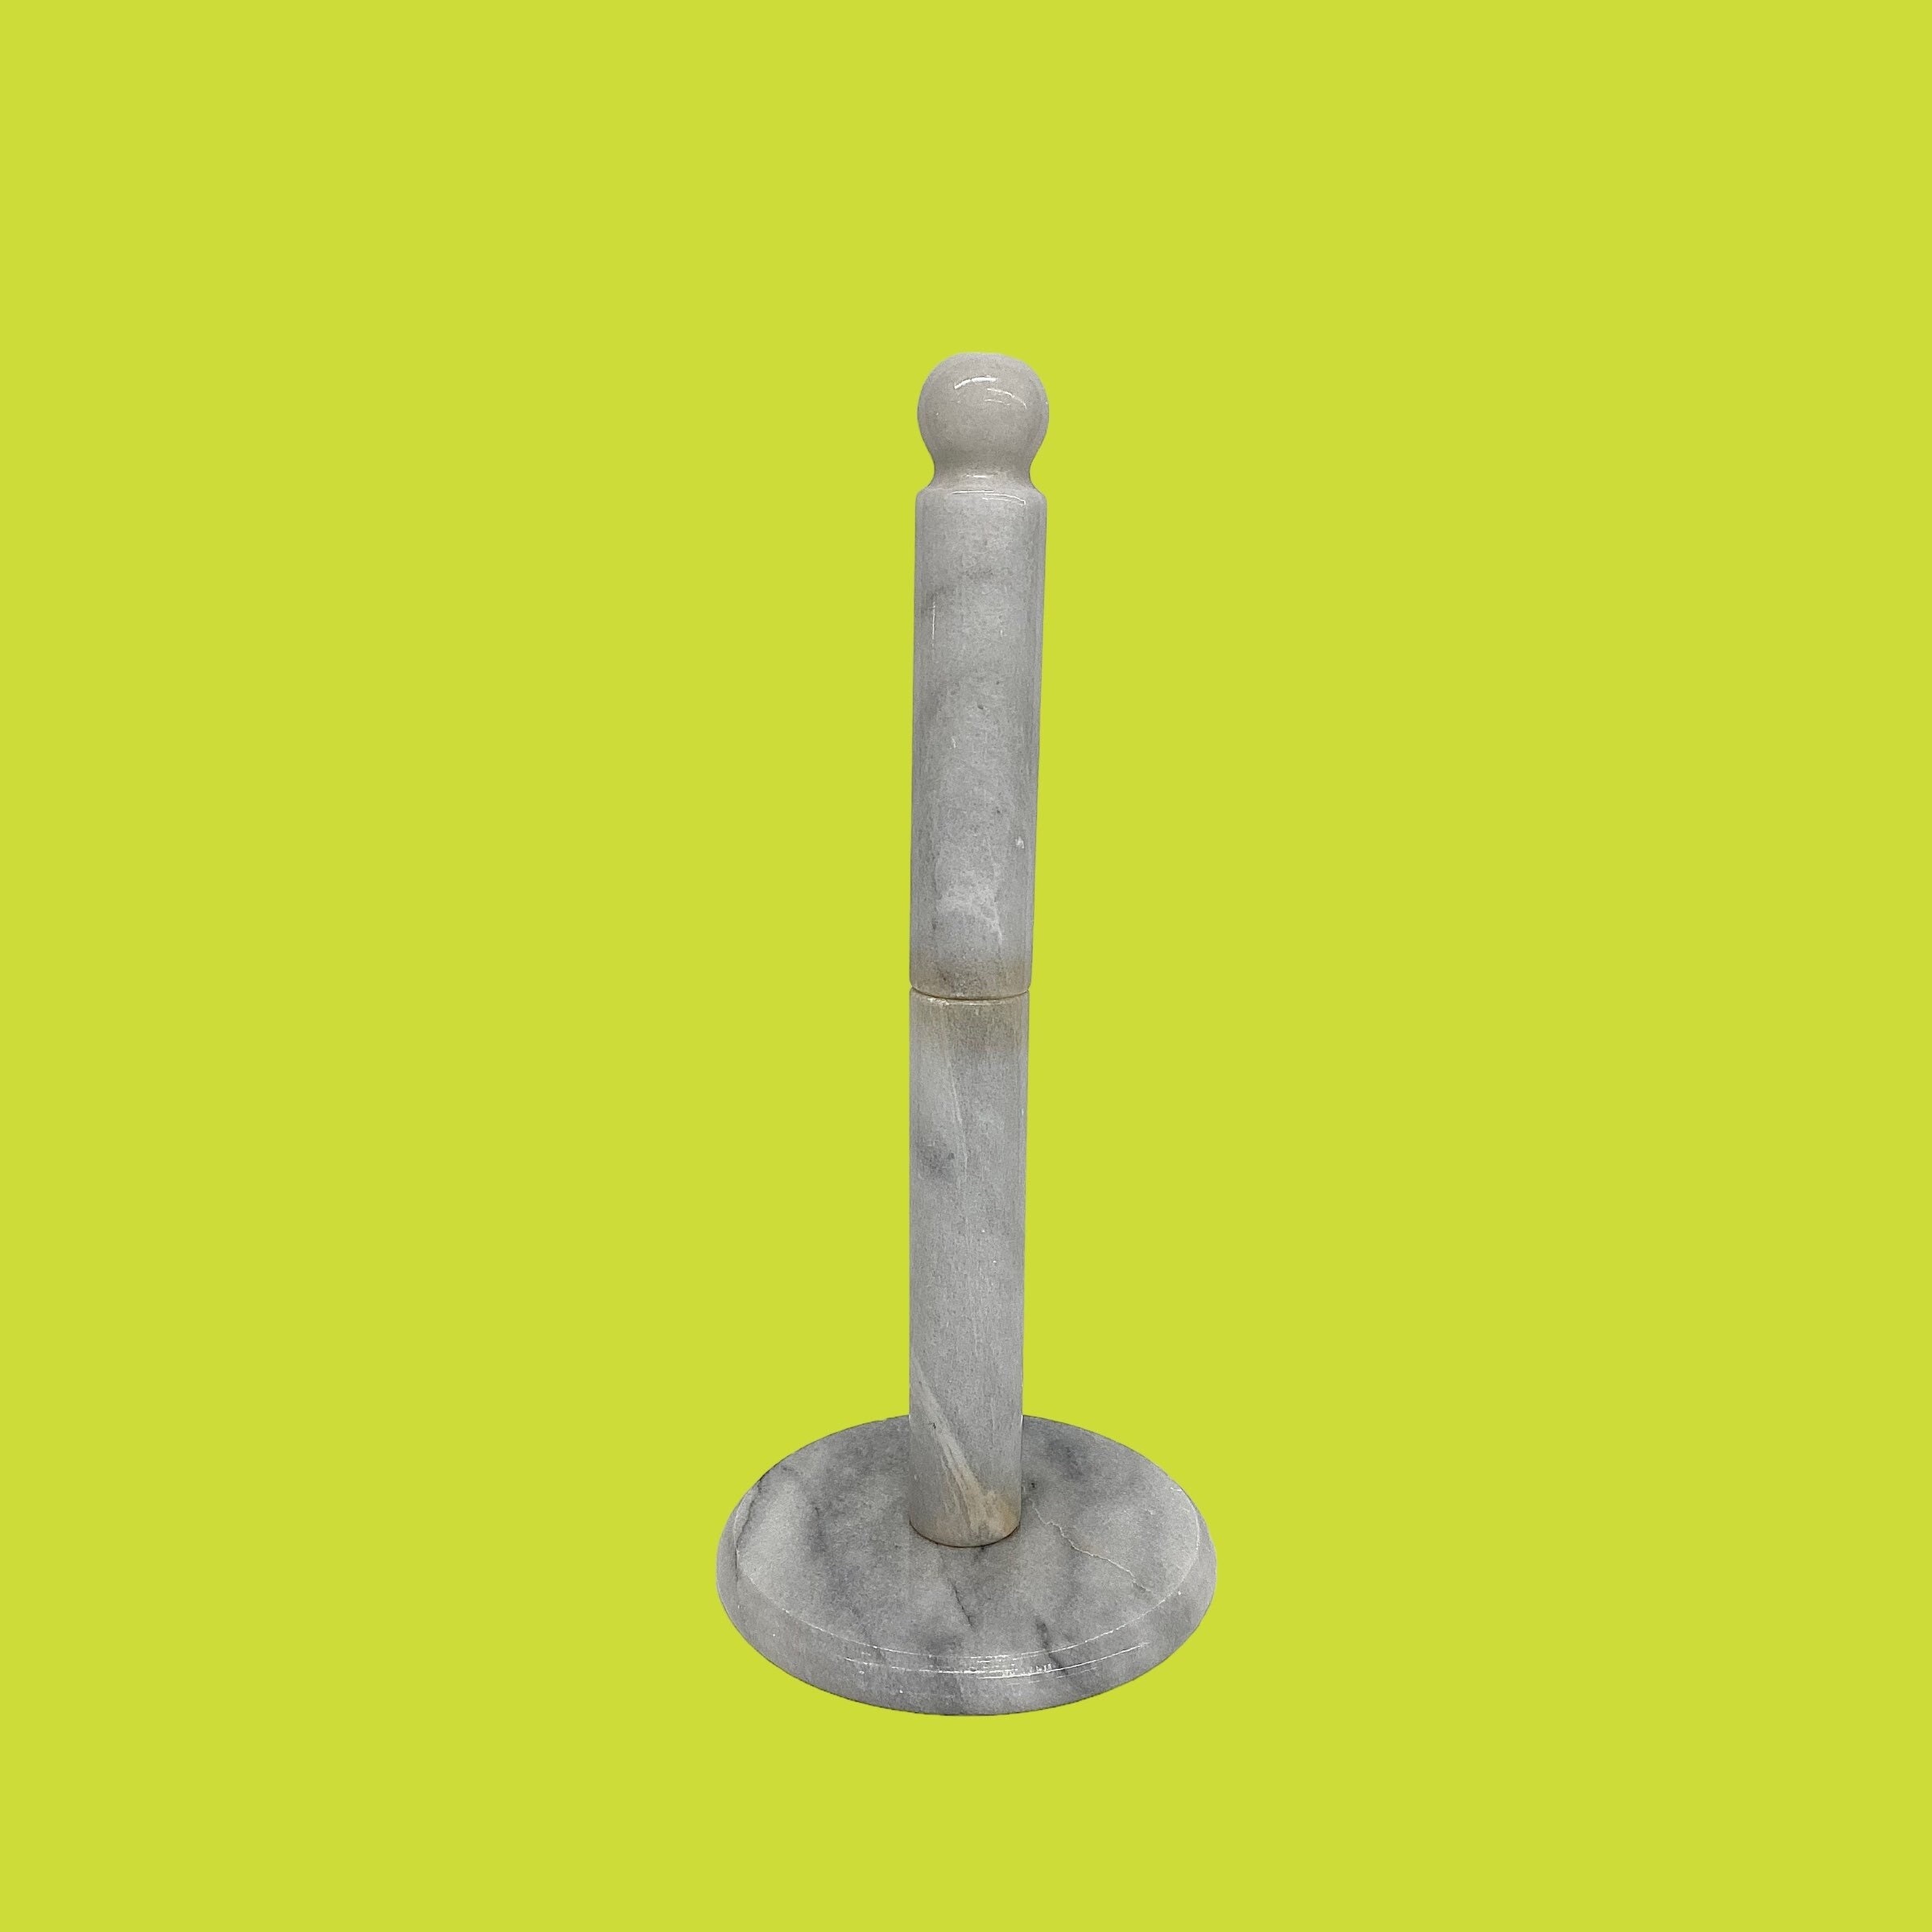 Vintage Solid Carrara Polished Marble Paper Towel Holder Kraft Paper  Classic Kitchen Chef Gift Timeless Bianco Natural Stone Washroom Heavy 